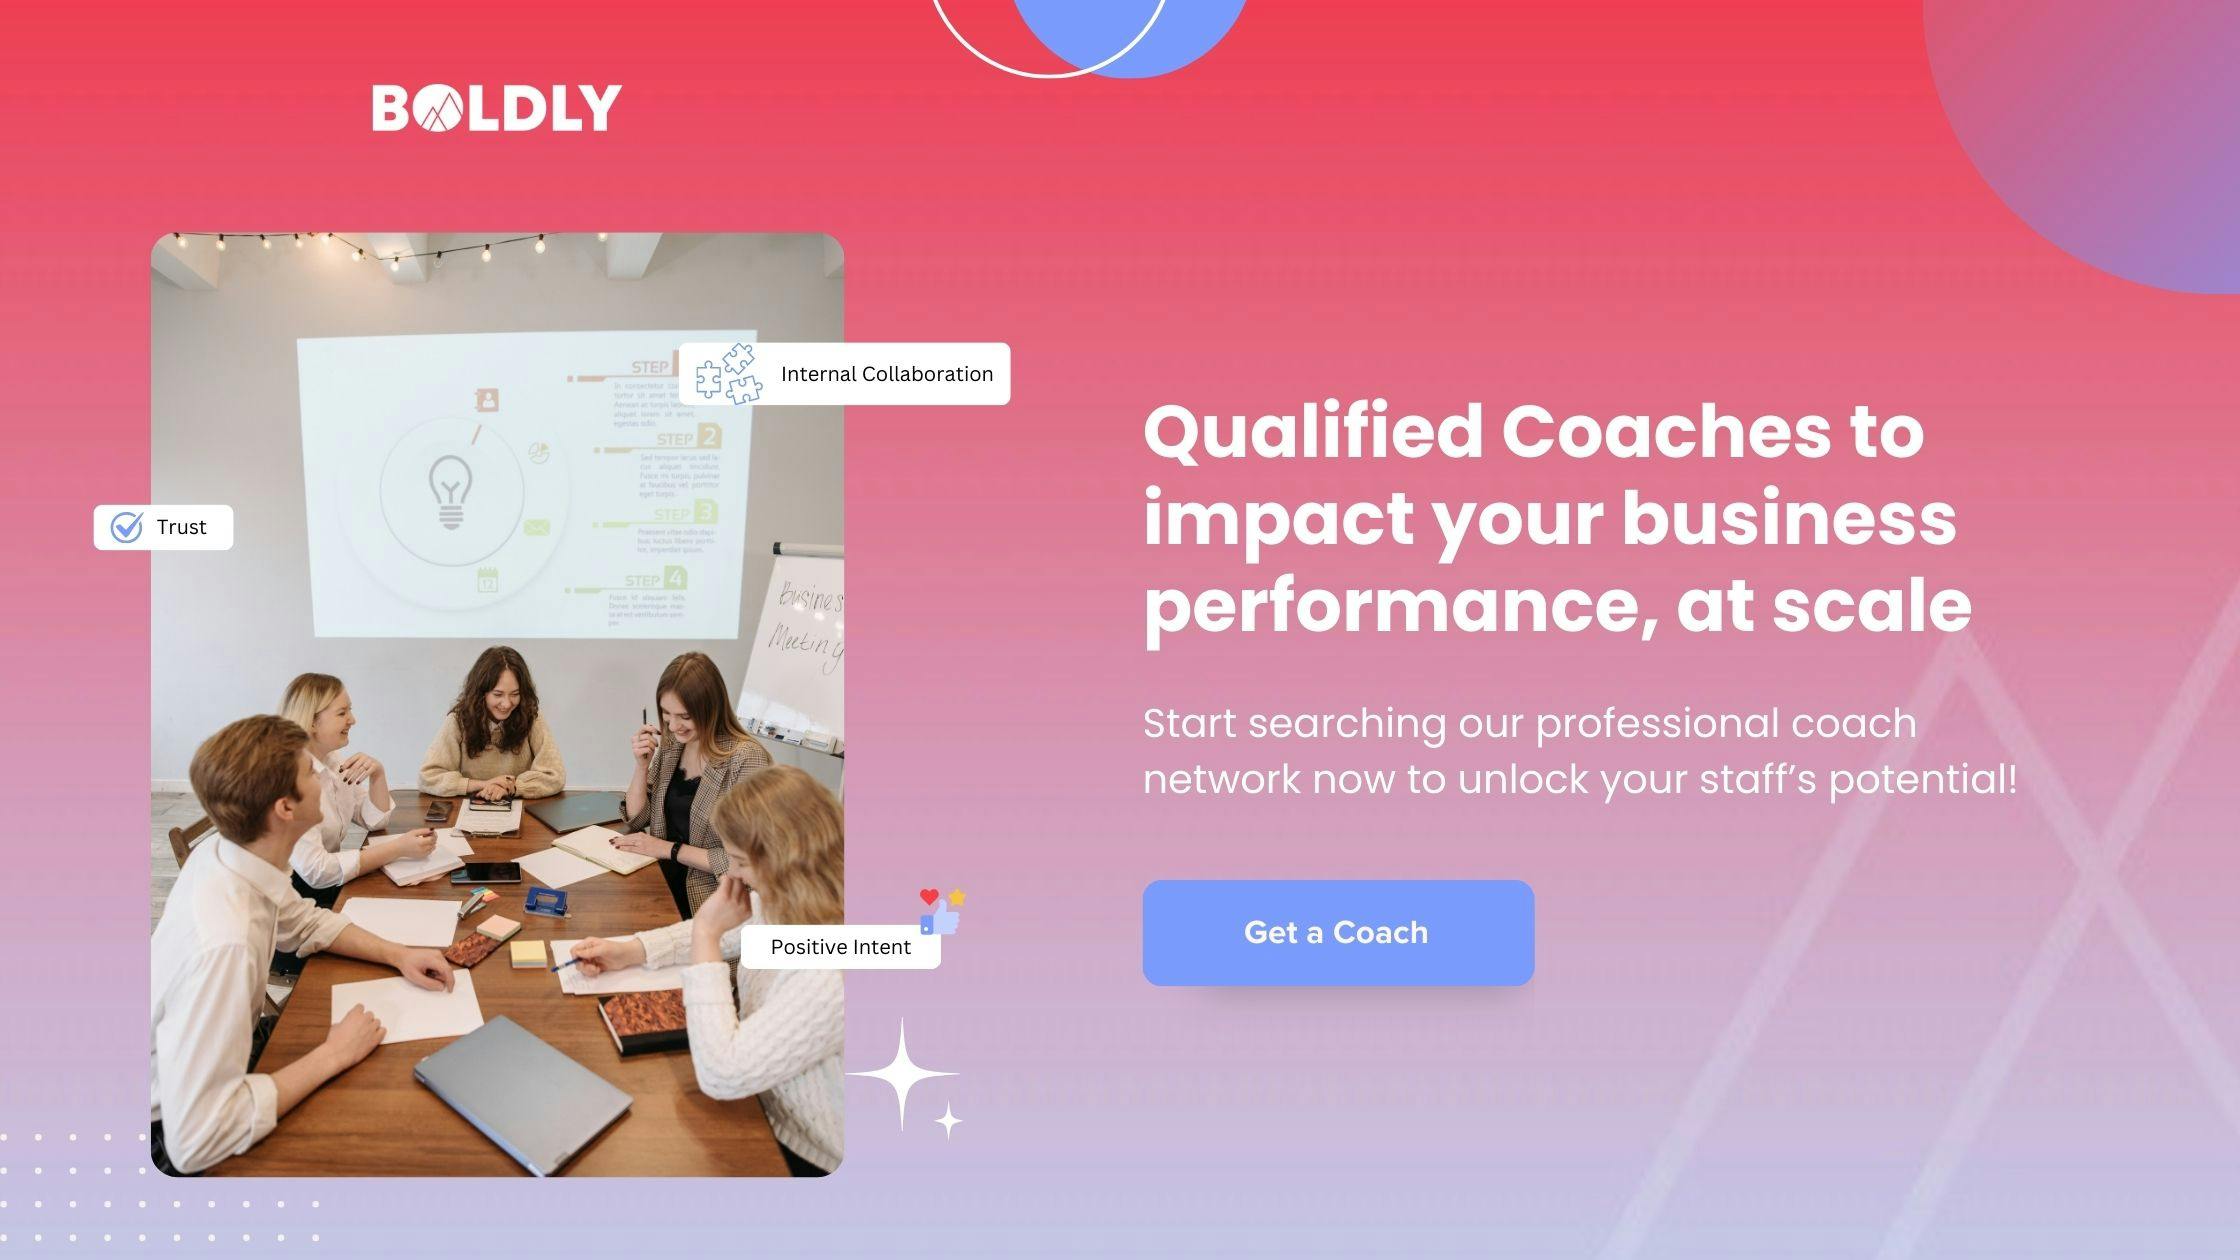 Find a qualified coach for your business at BOLDLY